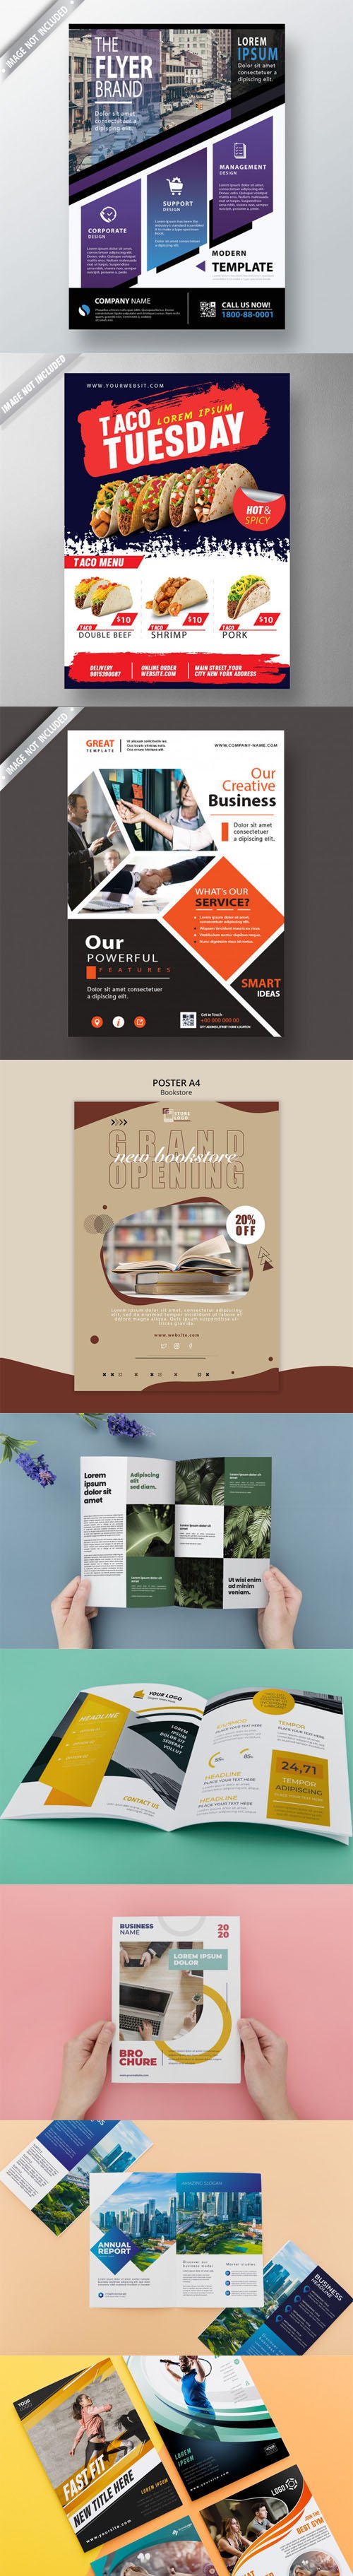 9 Multipurpose Brochures & Flyers PSD Mockups Templates Collection